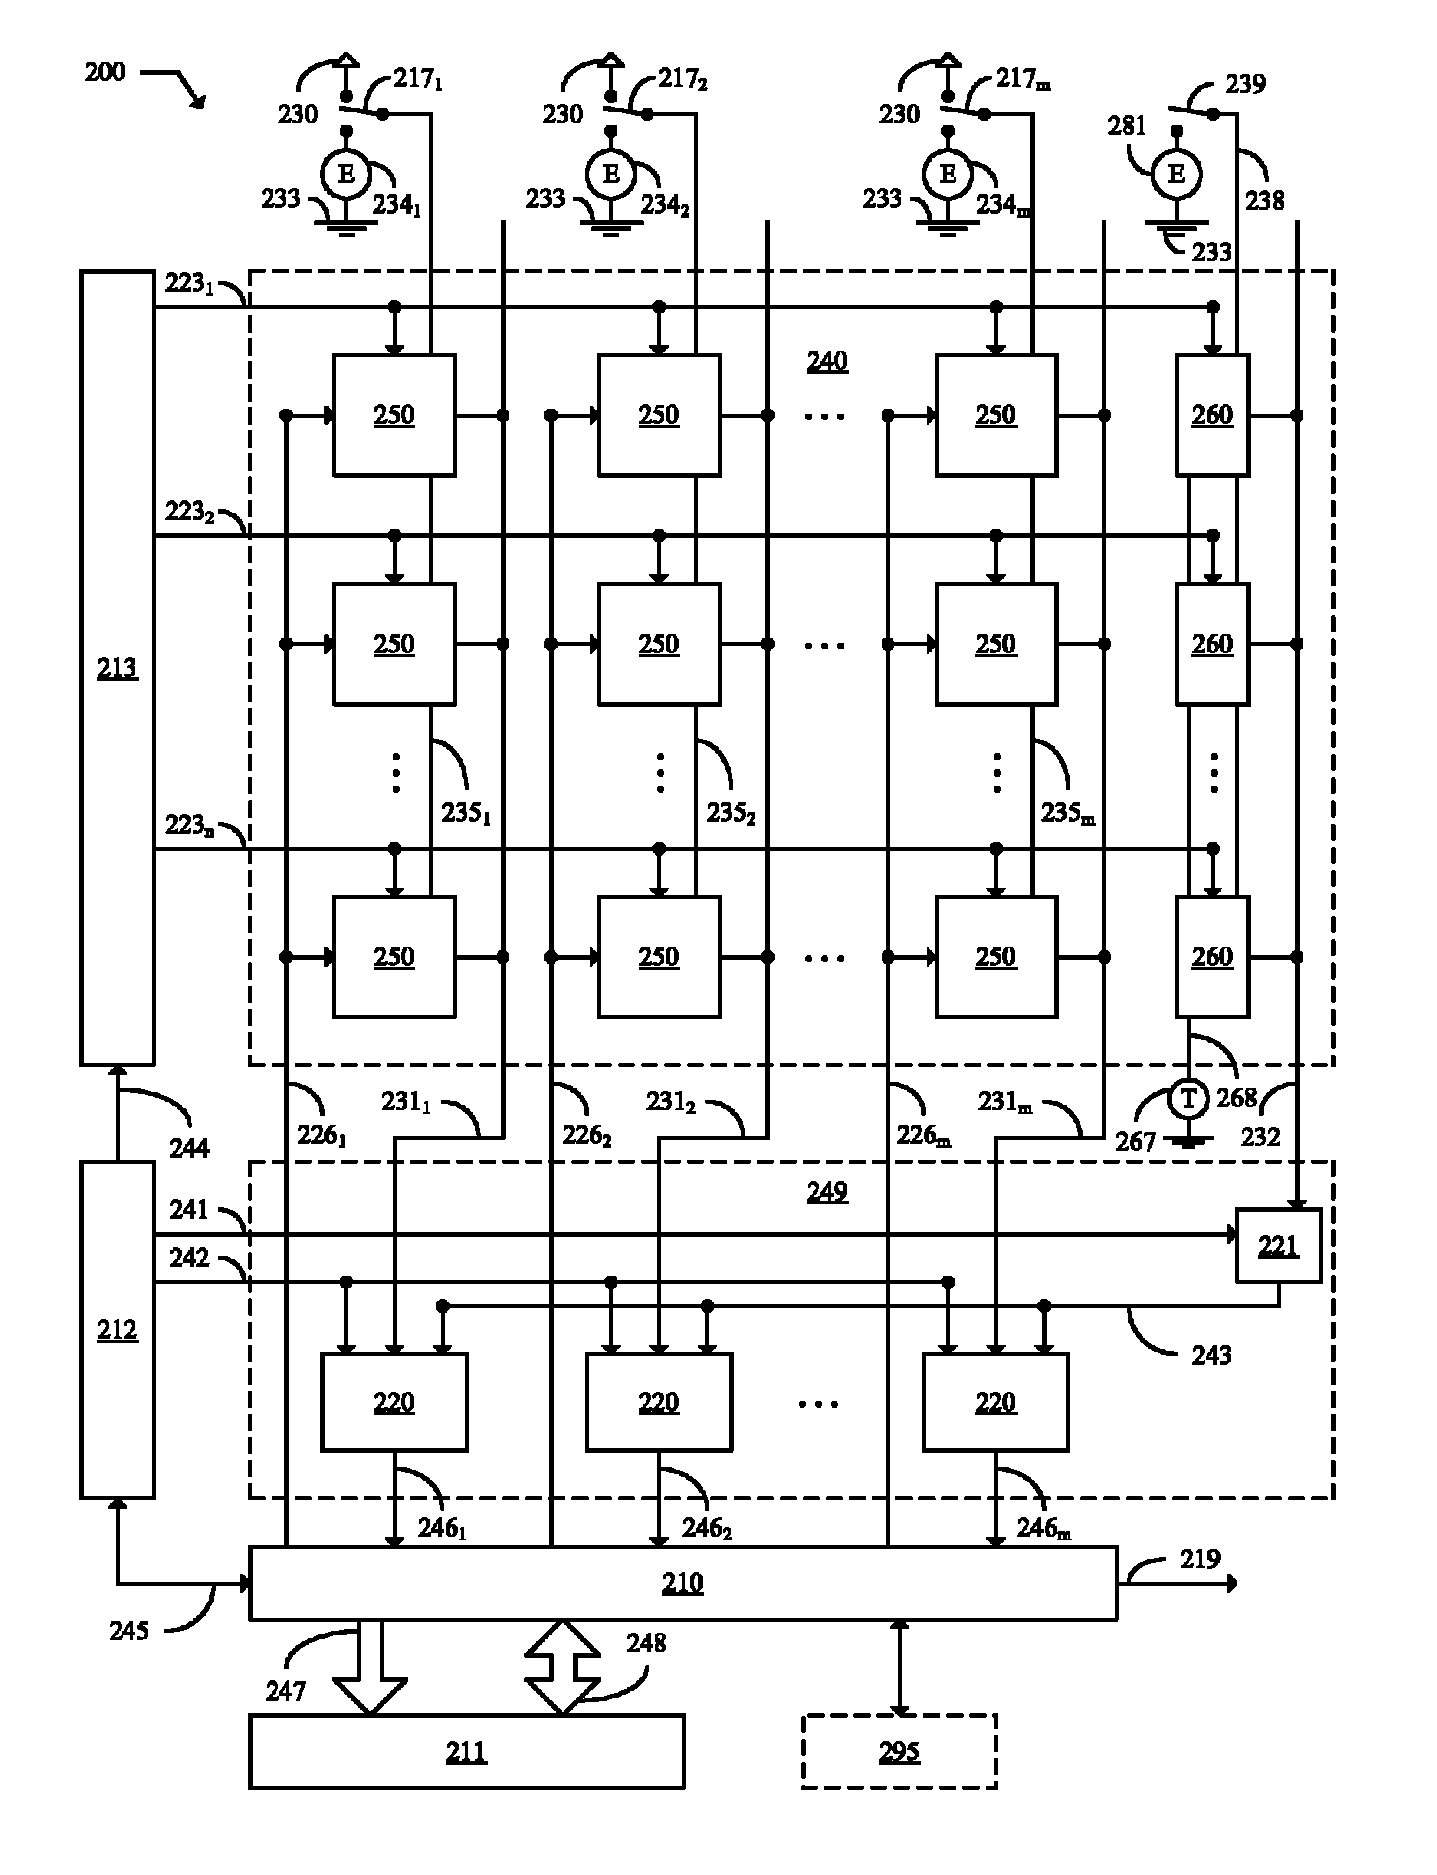 Circuits and methods allowing for pixel array exposure pattern control